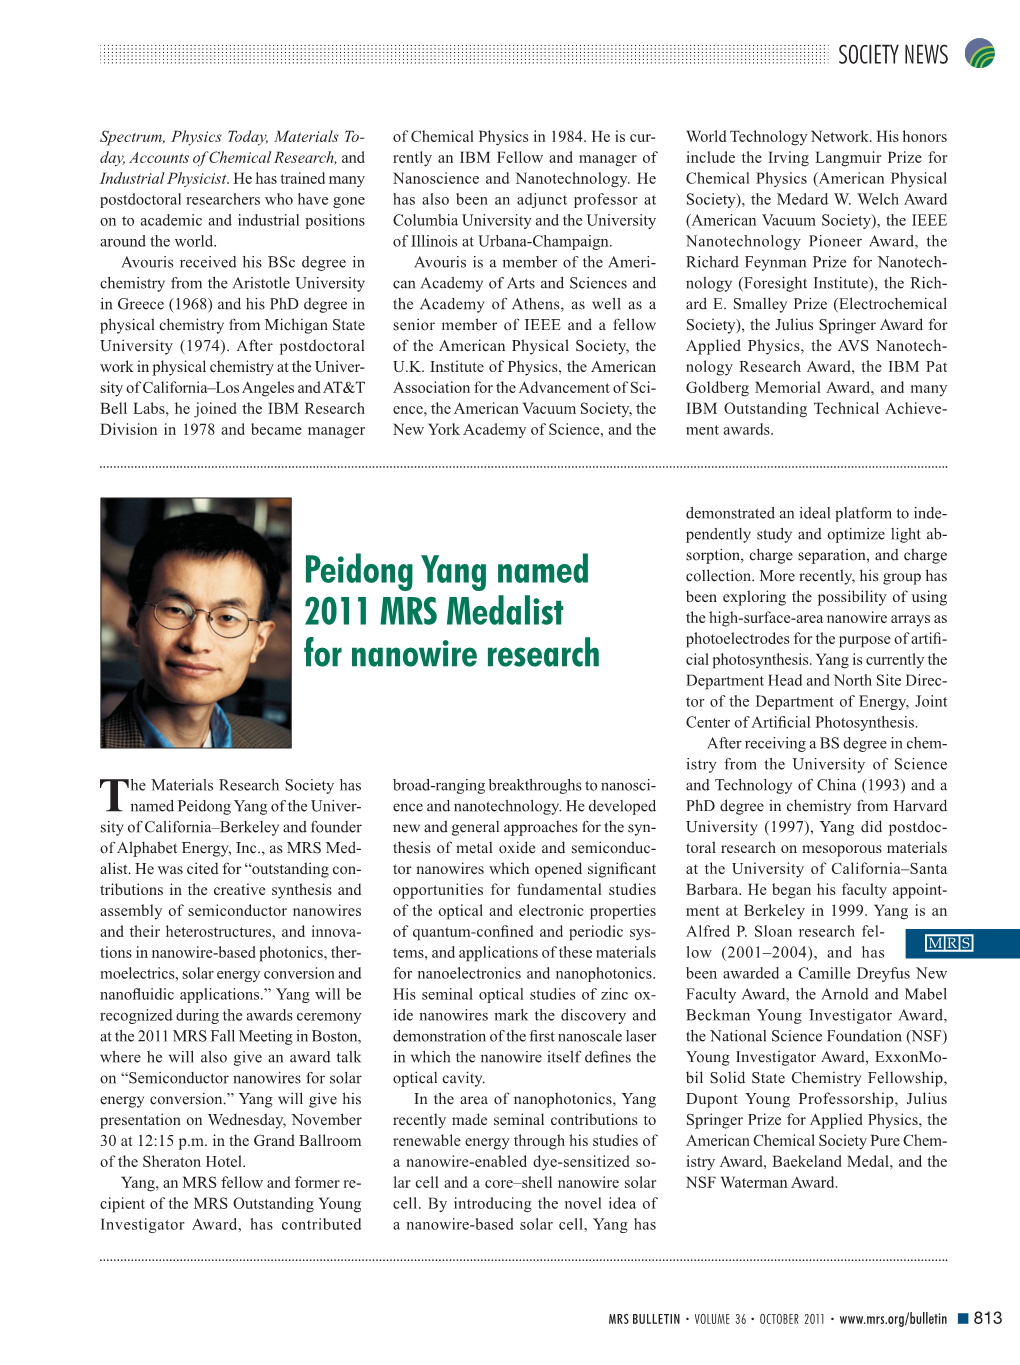 Peidong Yang Named 2011 MRS Medalist for Nanowire Research